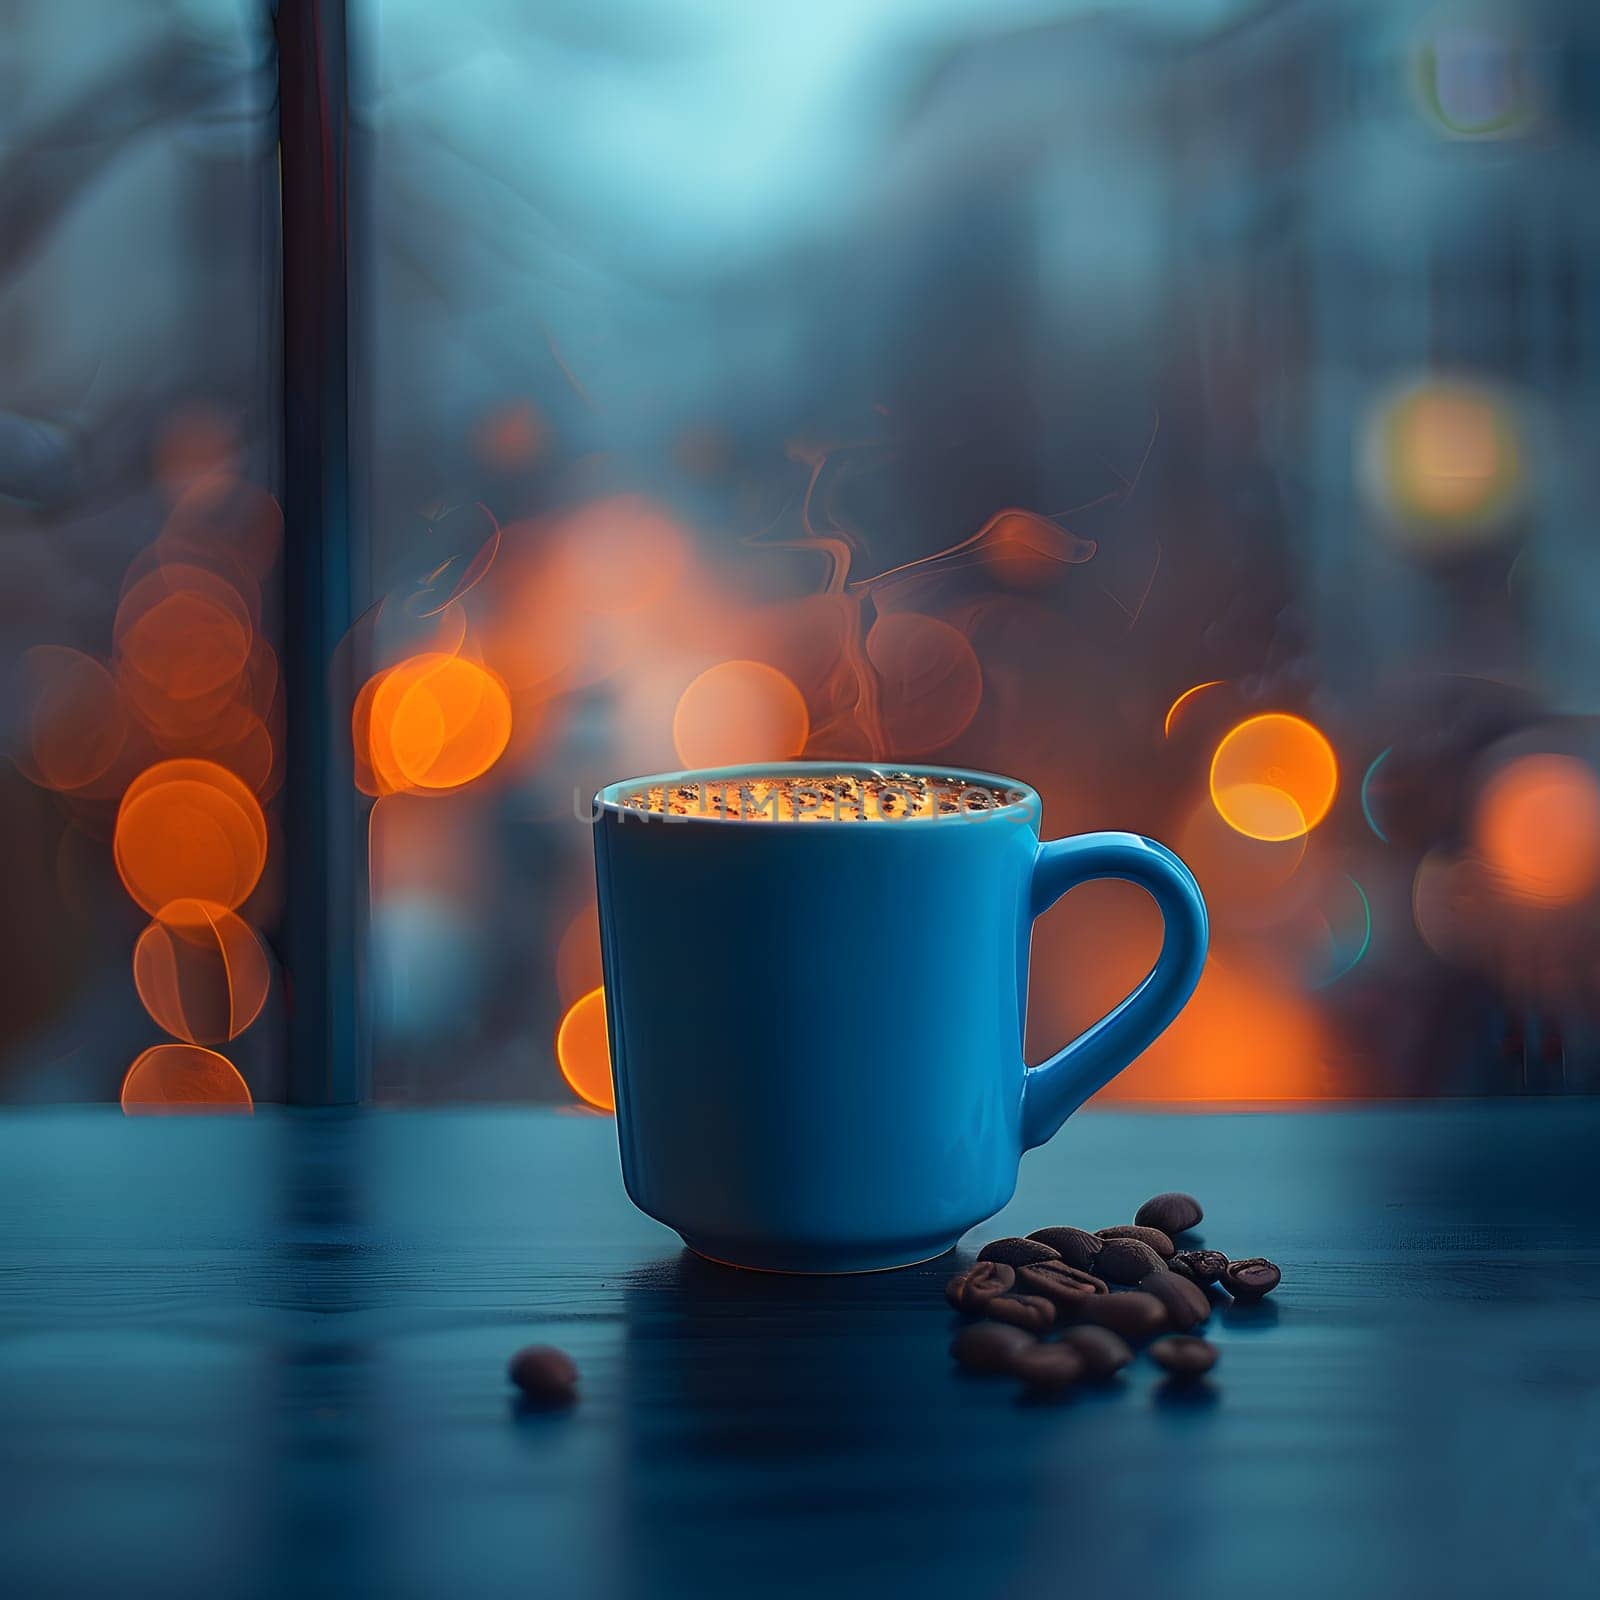 A Coffee cup rests on a Tableware in front of a window, with the Sky reflecting on its surface. The orange hue complements the serene view